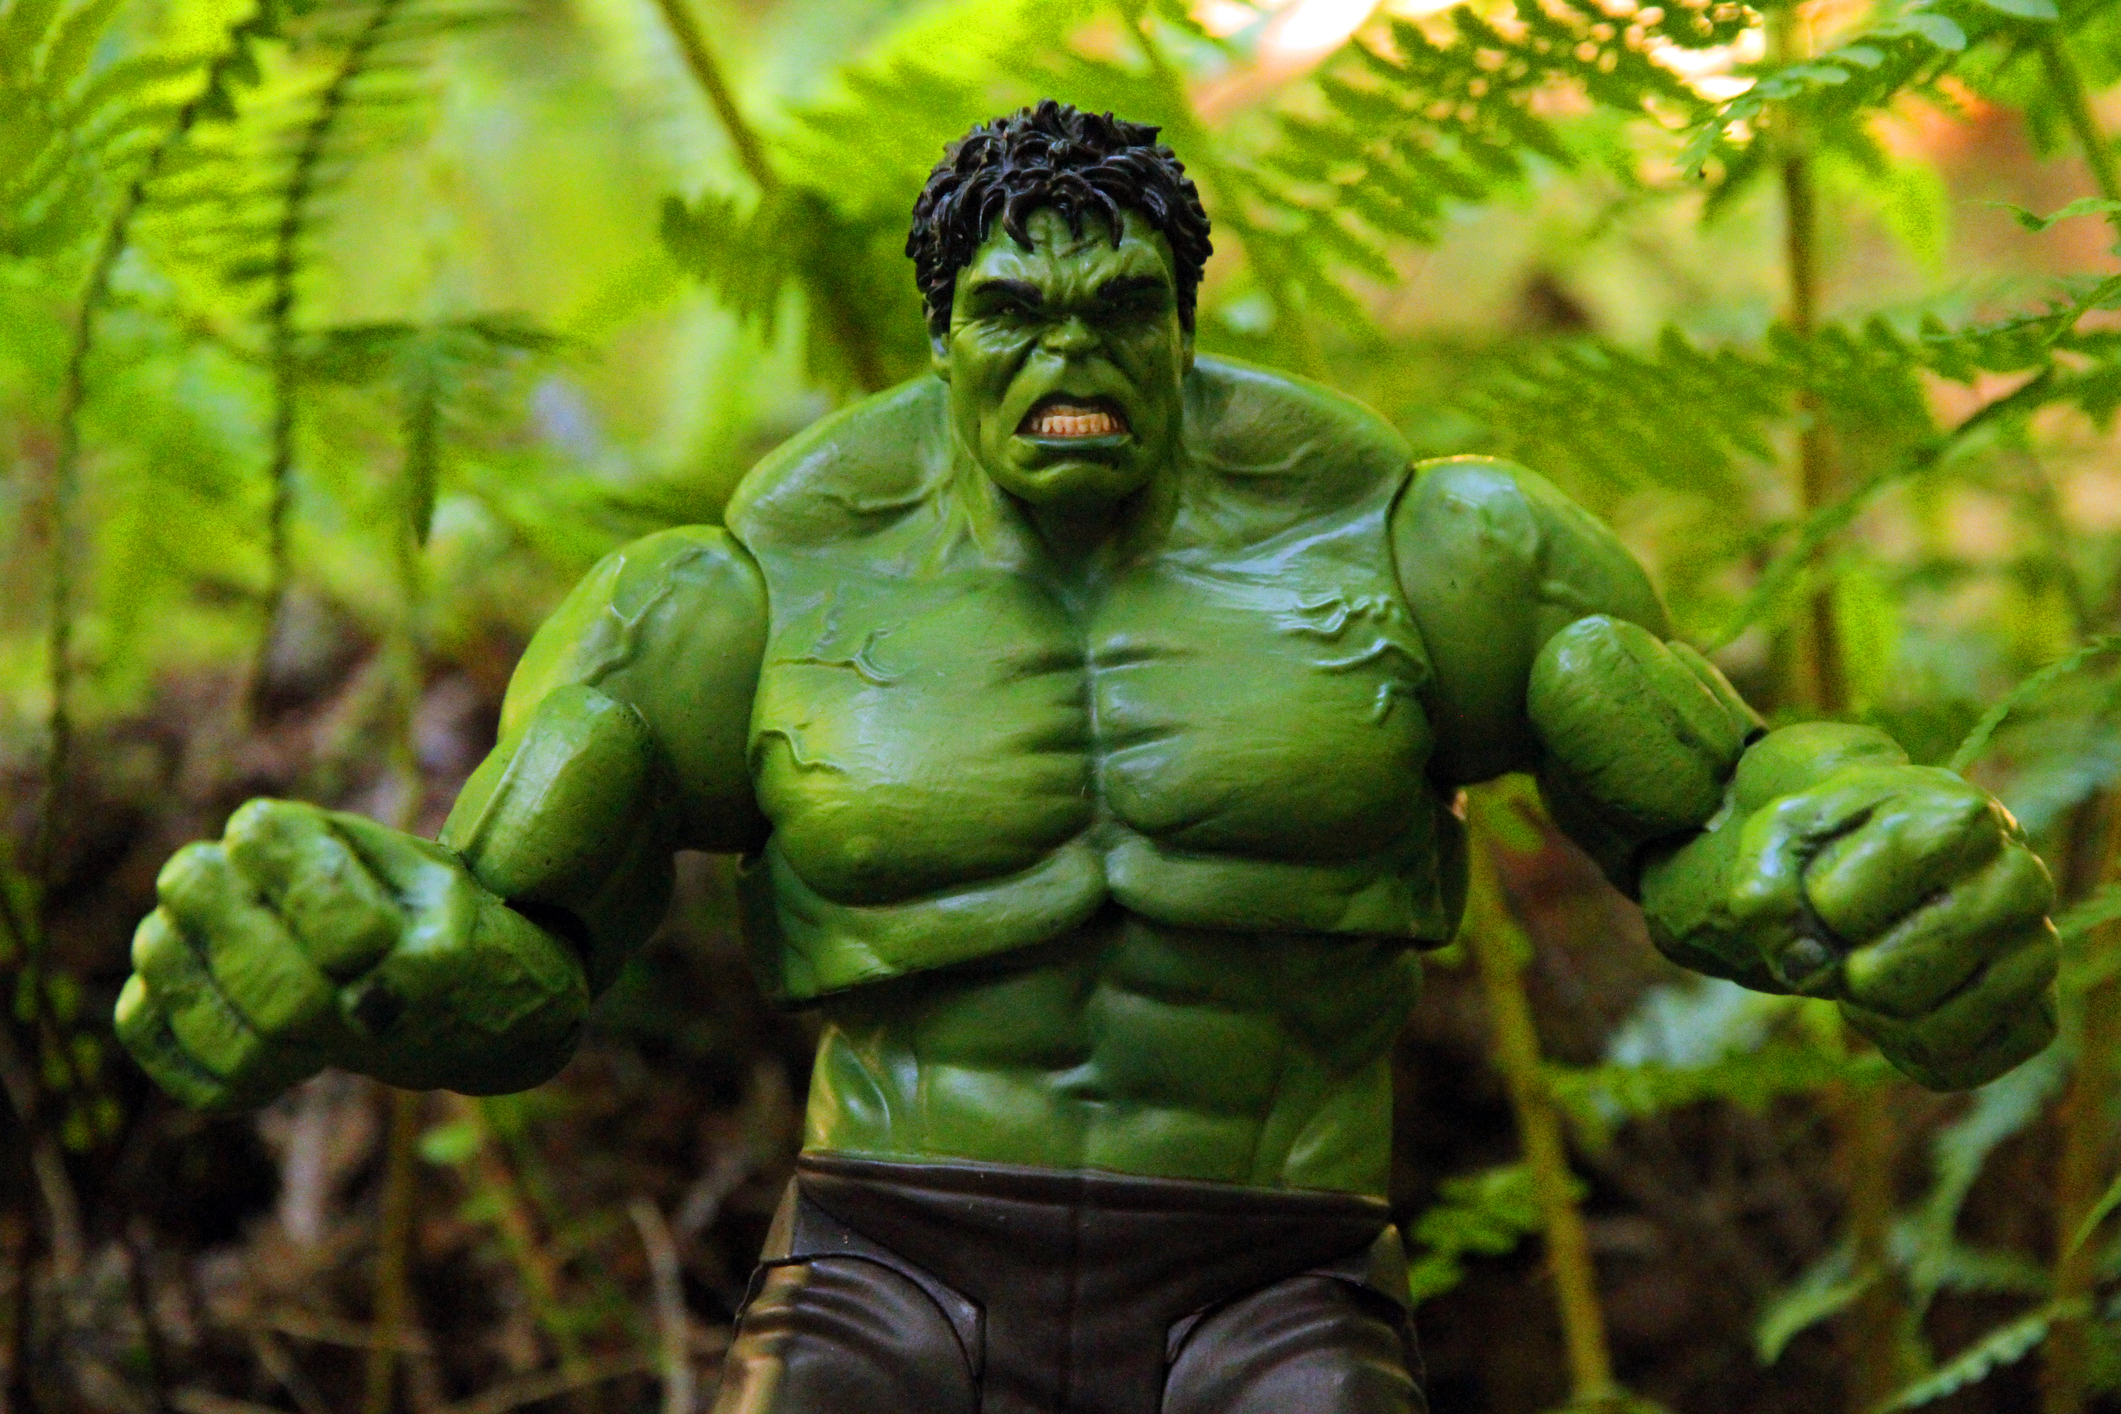 West Vancouver, Canada - May 19, 2015: A toy of the Incredible Hulk in the rainforest of Lighthouse Park in the City of West Vancouver, British Columbia. The Hulk is a large green creature with unlimited strength that manifests when he is angry. The Hulk is the alter ego of Bruce Banner, a meek and socially awkward scientist. The toy is from Marvel Select. (Brendan Hunter—Getty Images)